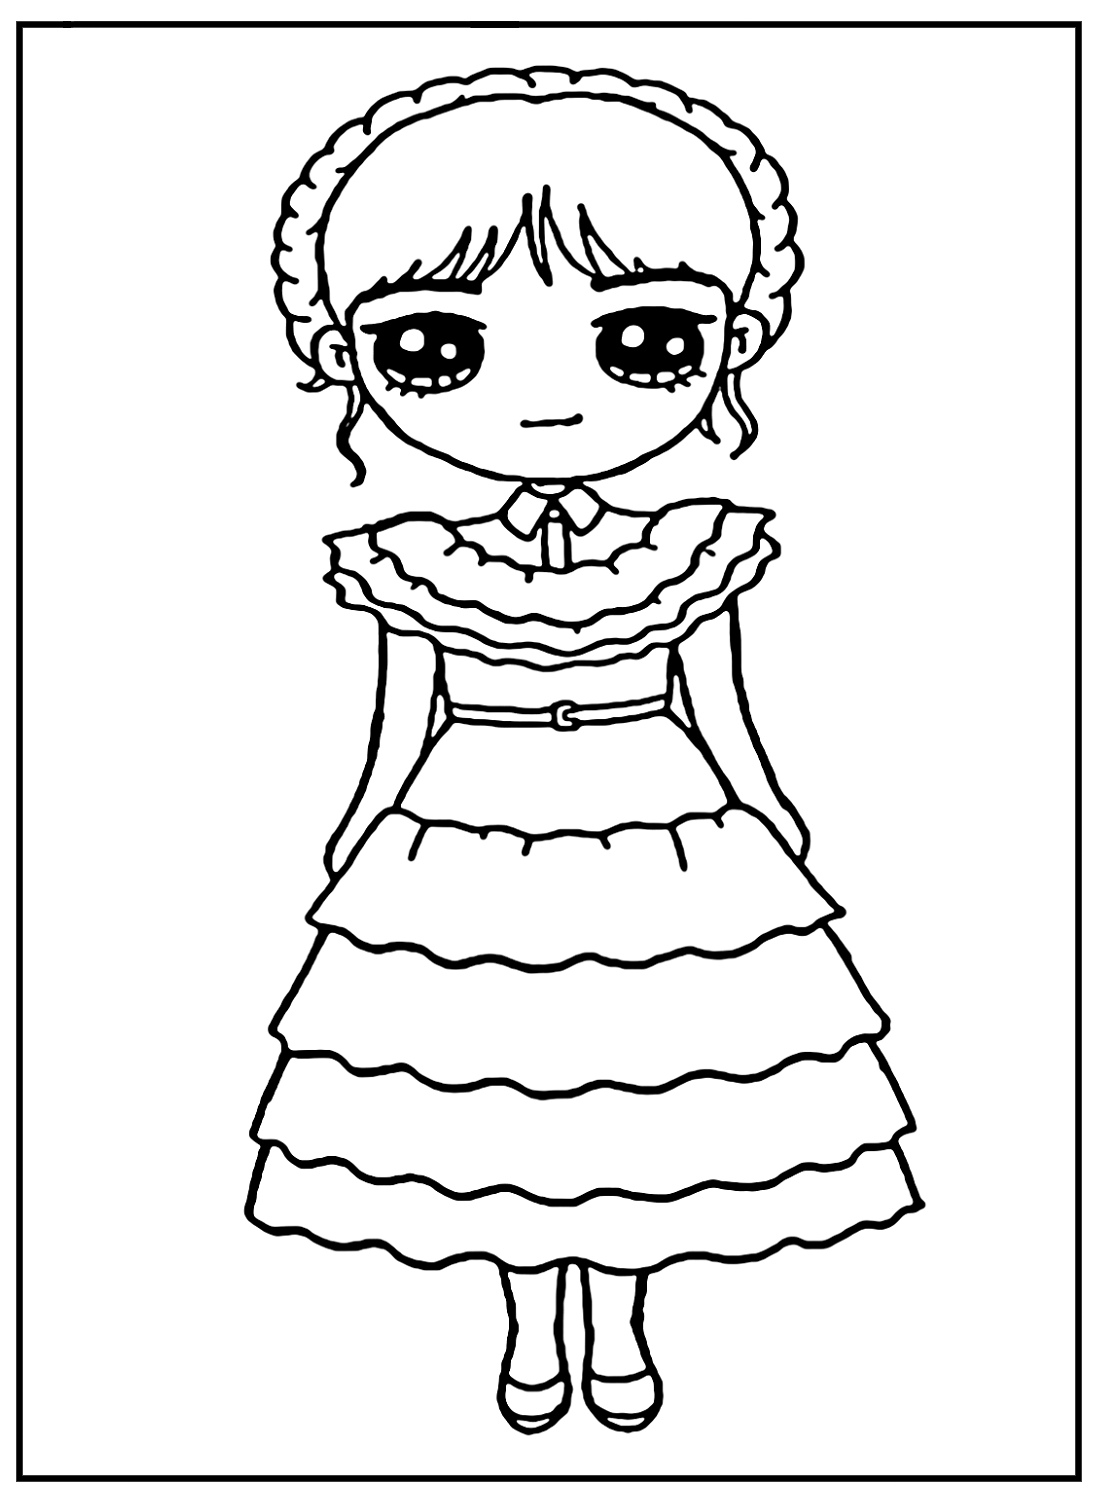 Chibi Wednesday Addams Coloring Page